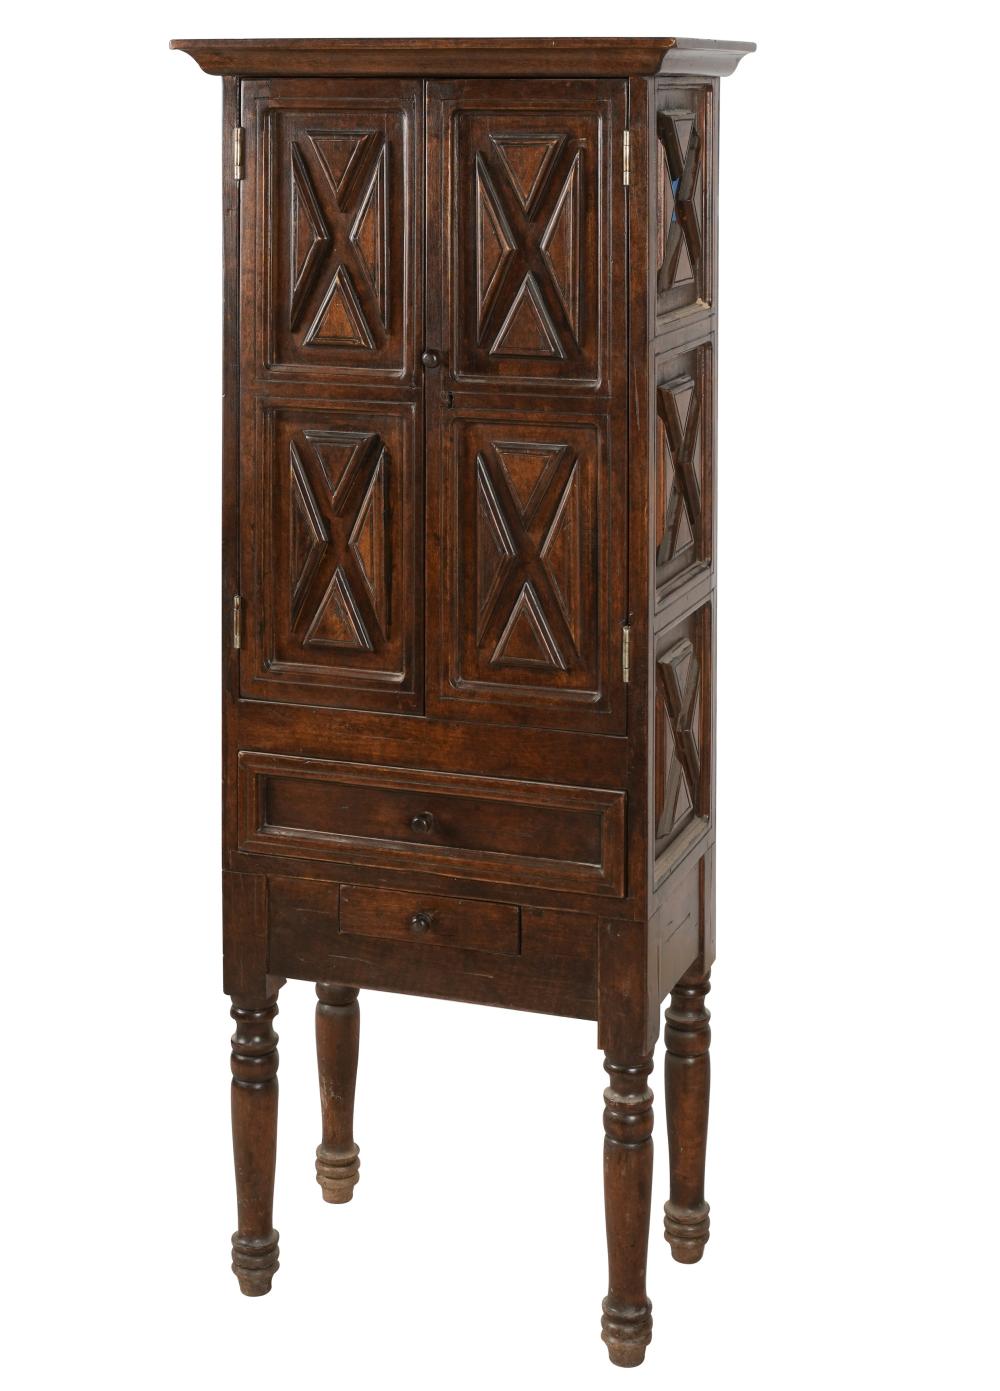 STAINED WOOD CABINETwith two hinged